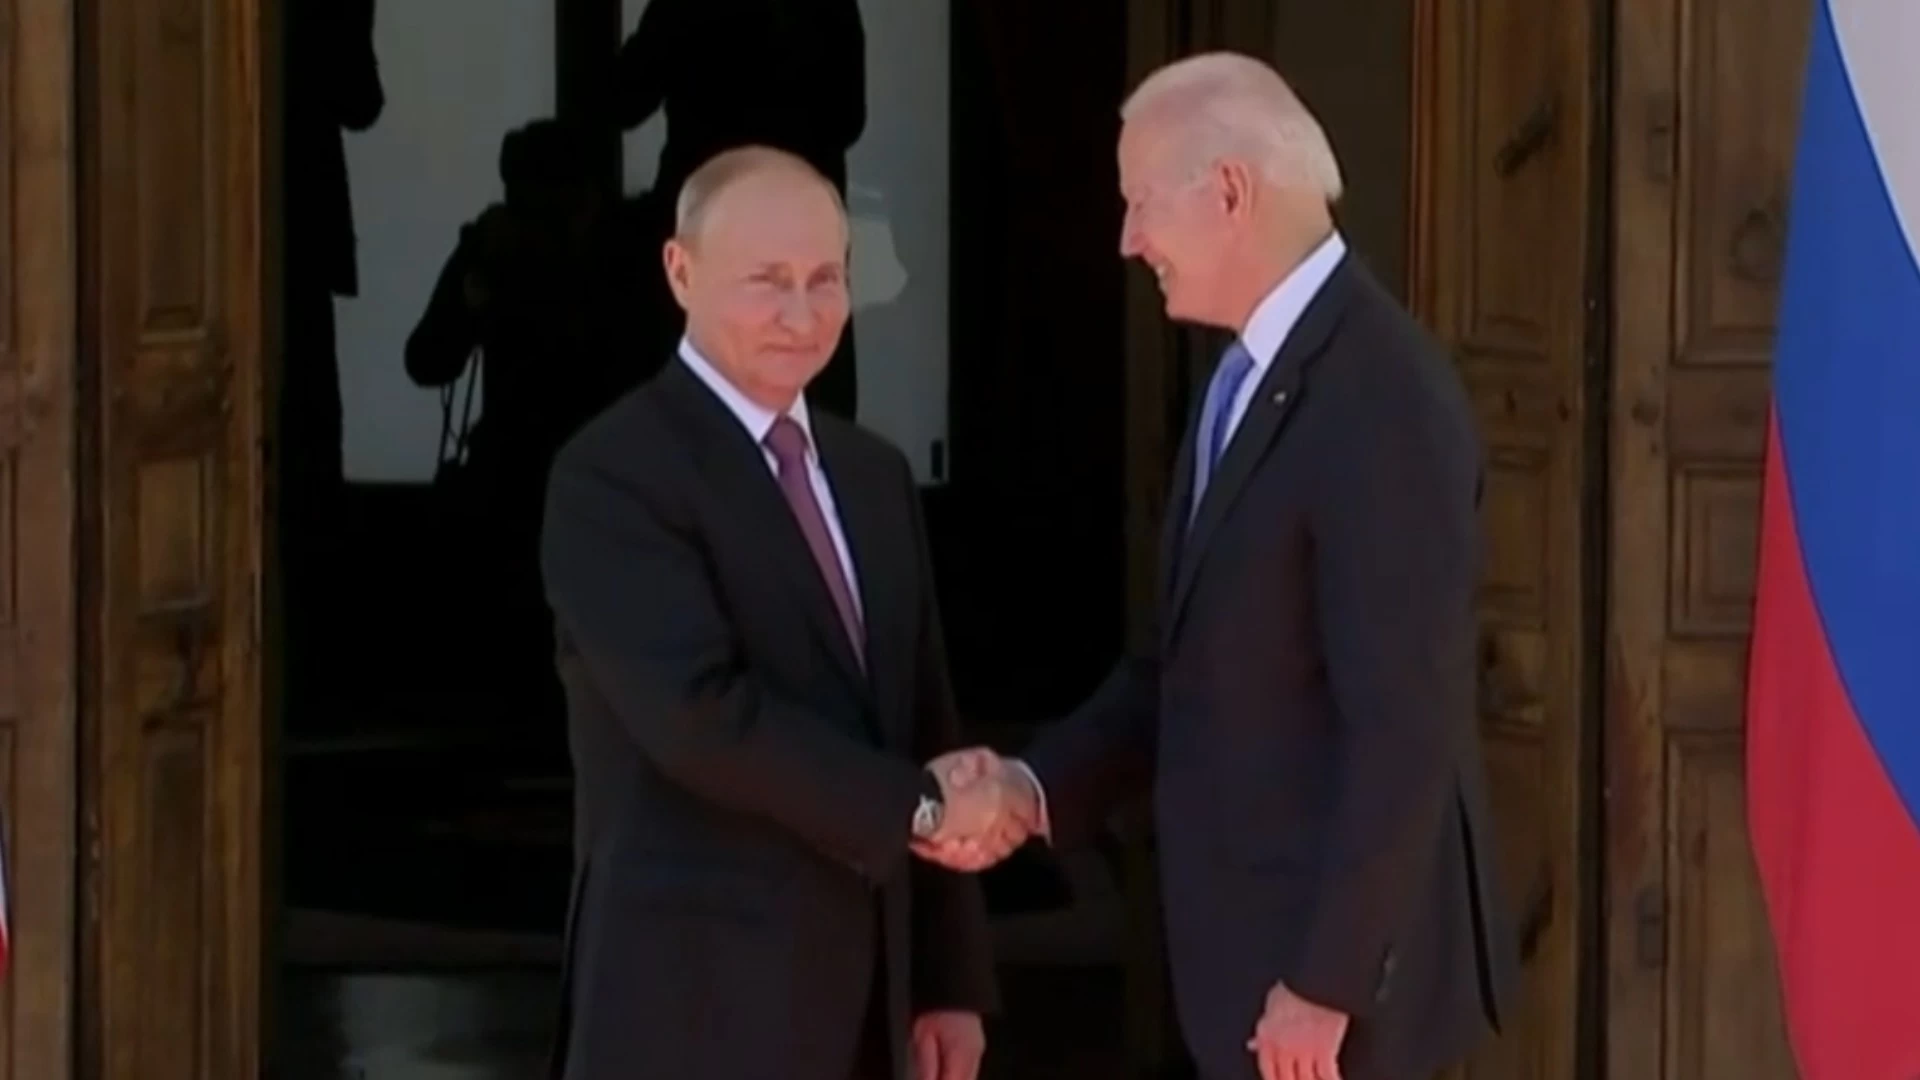 'Ice melts' as Putin and Biden agree at summit to resume arms control negotiations